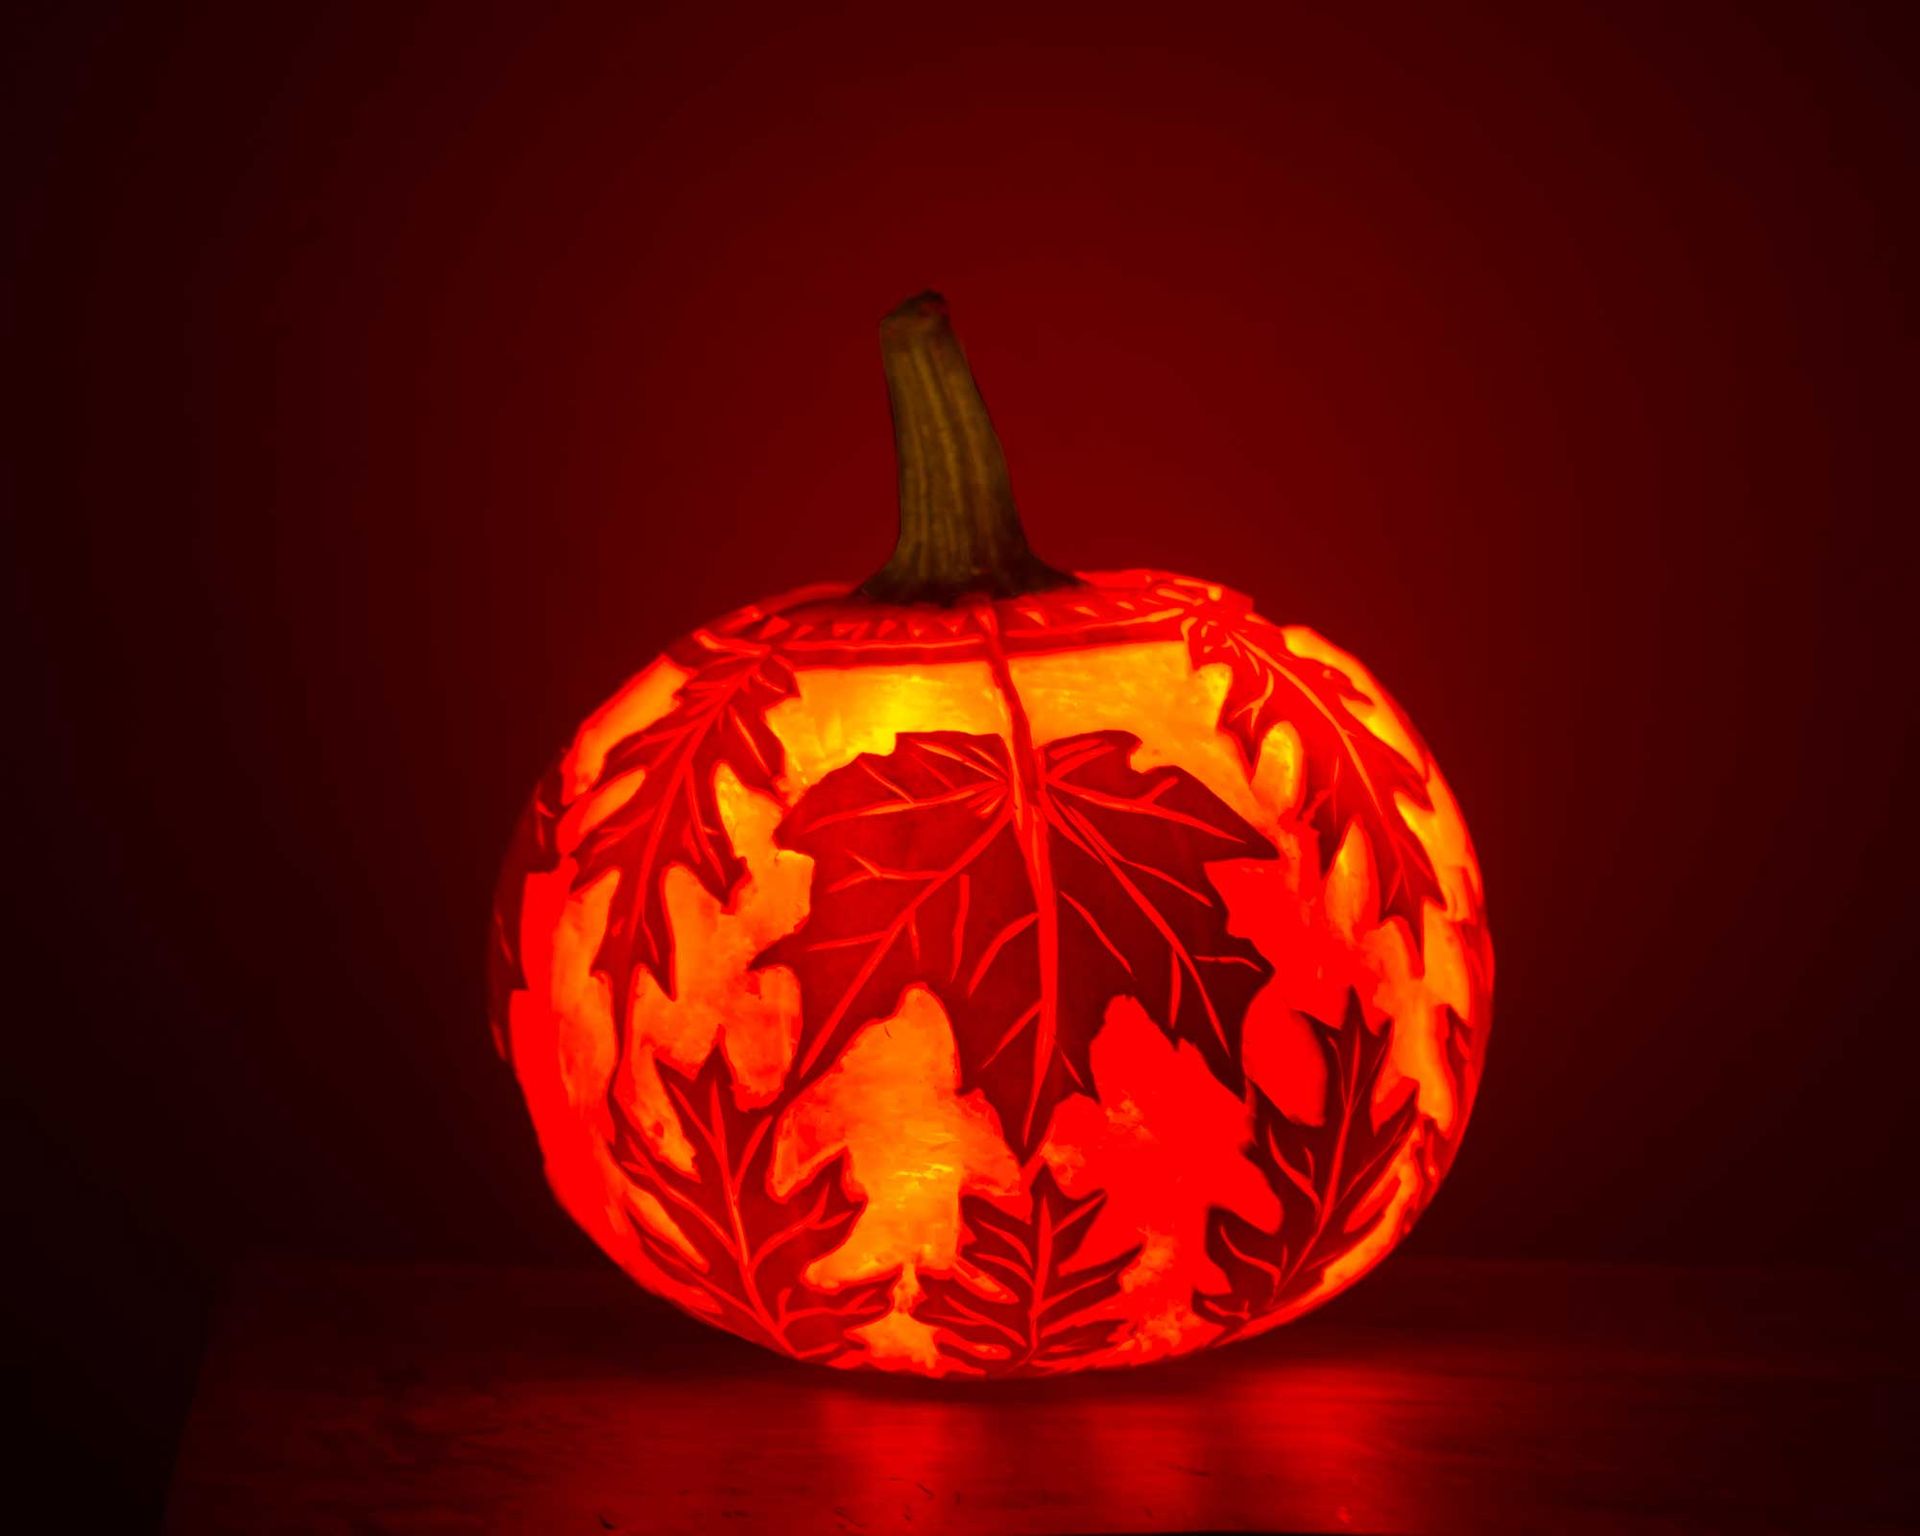 Pumpkin carving ideas: 11 eye-catching designs to try this Halloween ...